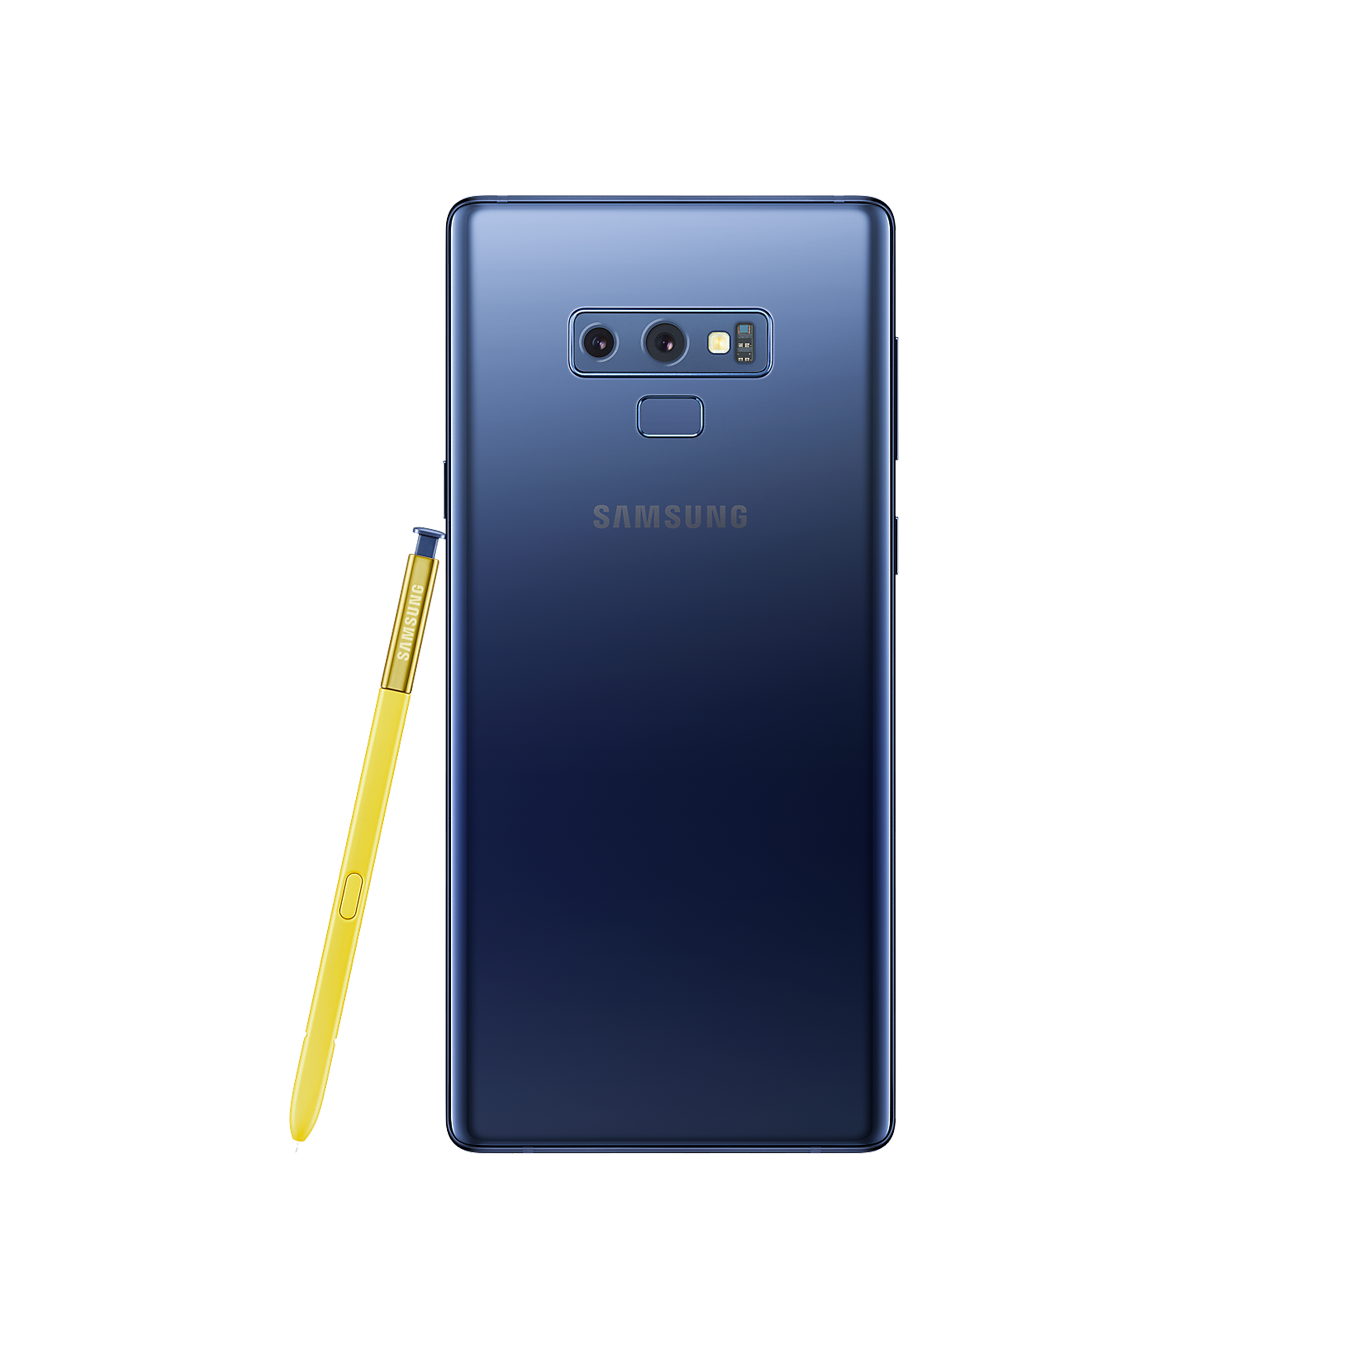 Samsung Galaxy Note9 IMEI repair service to fix bad or blacklisted IMEI, ensuring full functionality and connectivity, available at cleanimei.com